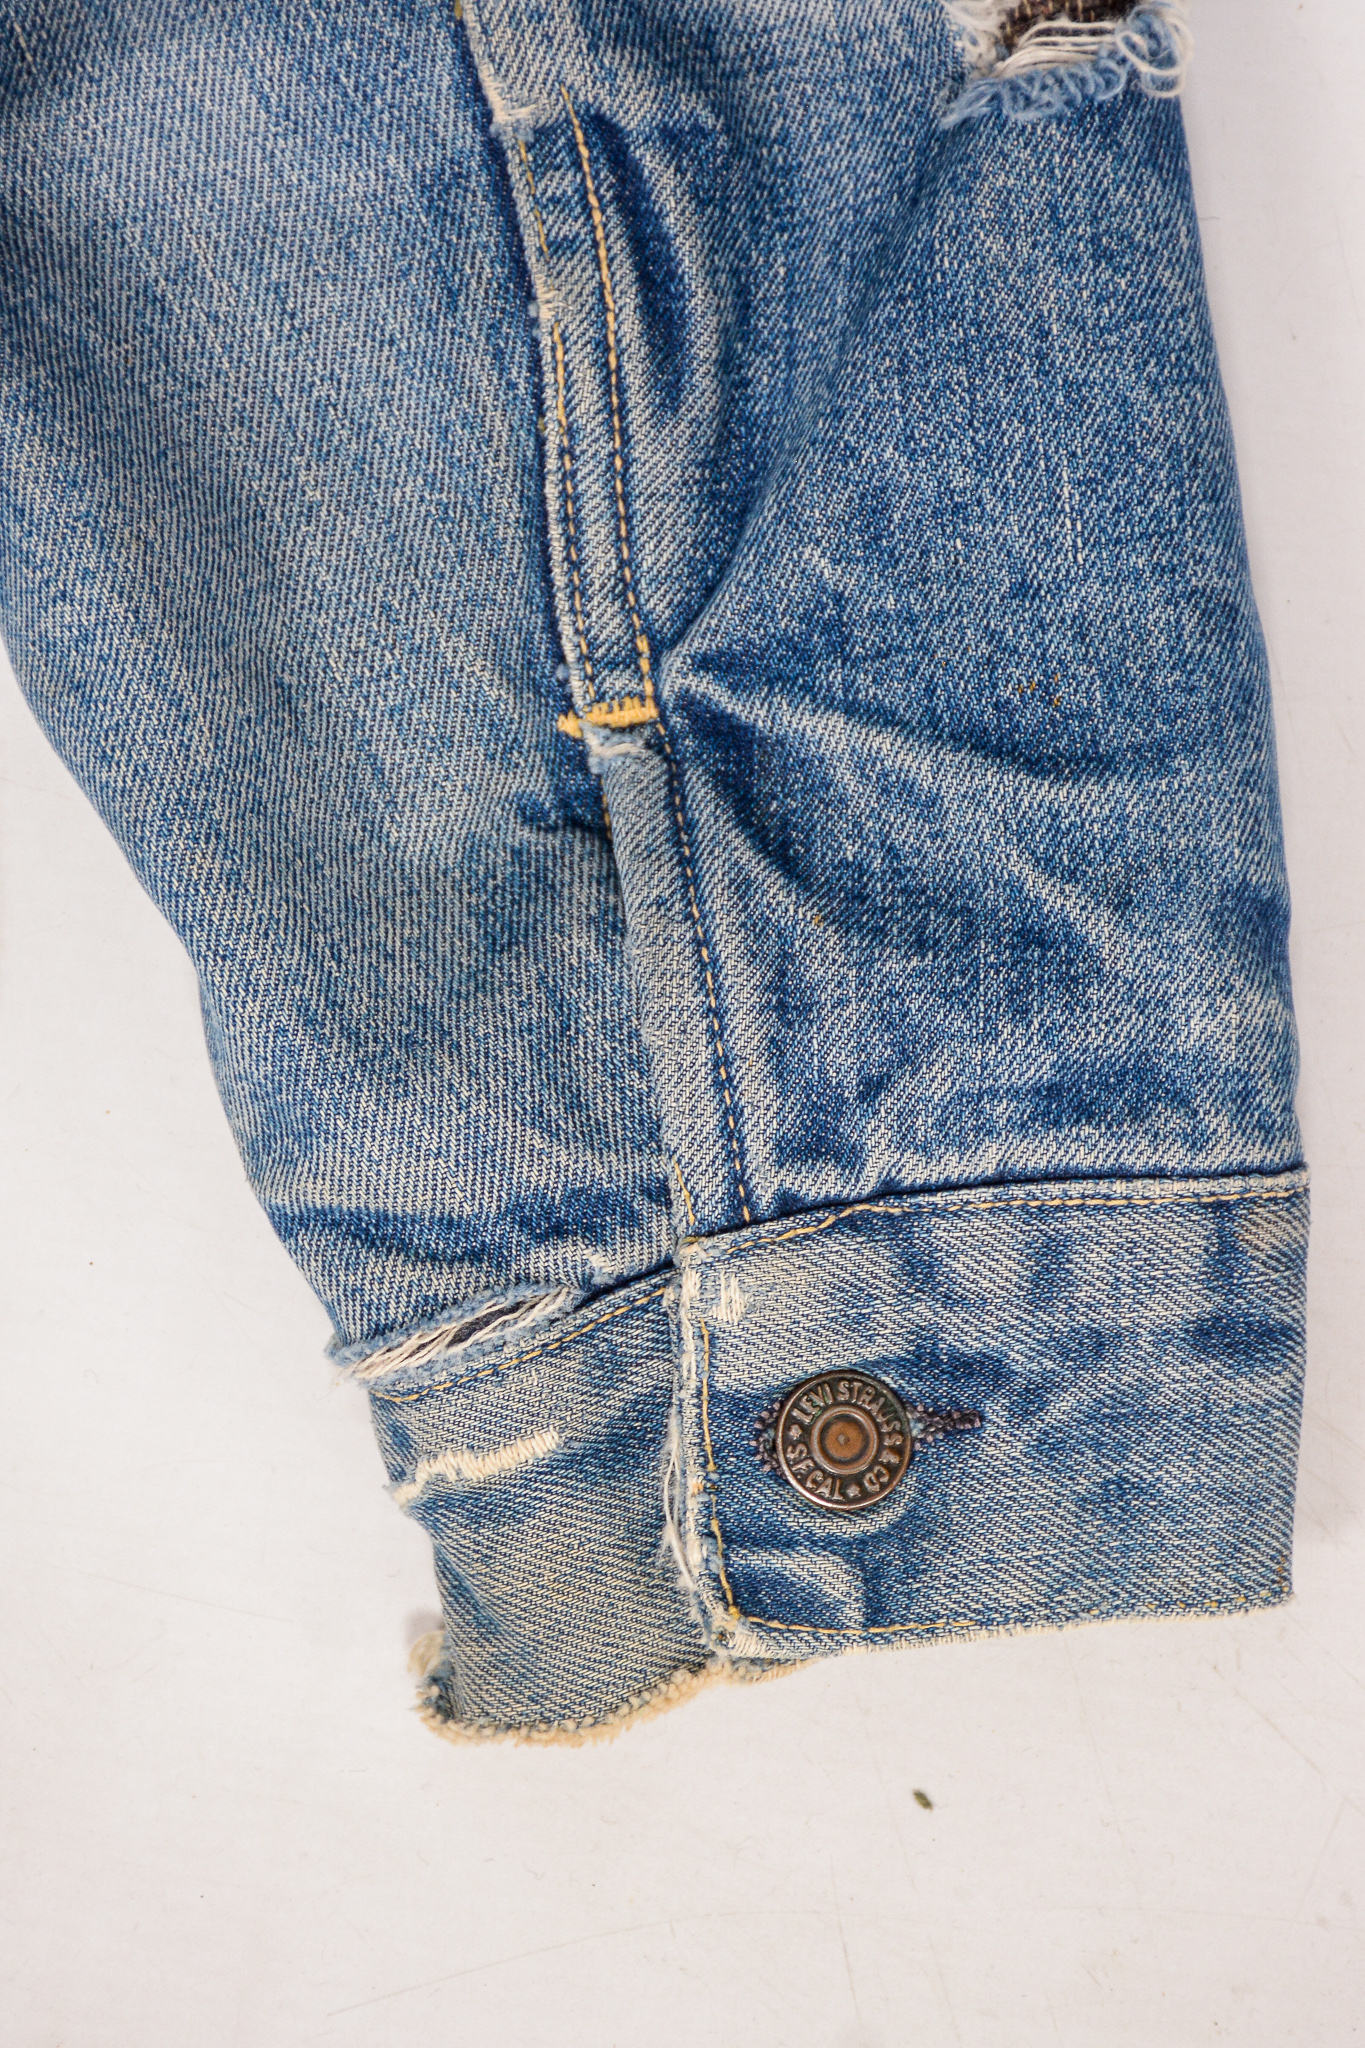 Worn Not Wasted Levis - Big E 599XX Type 3 60s lined